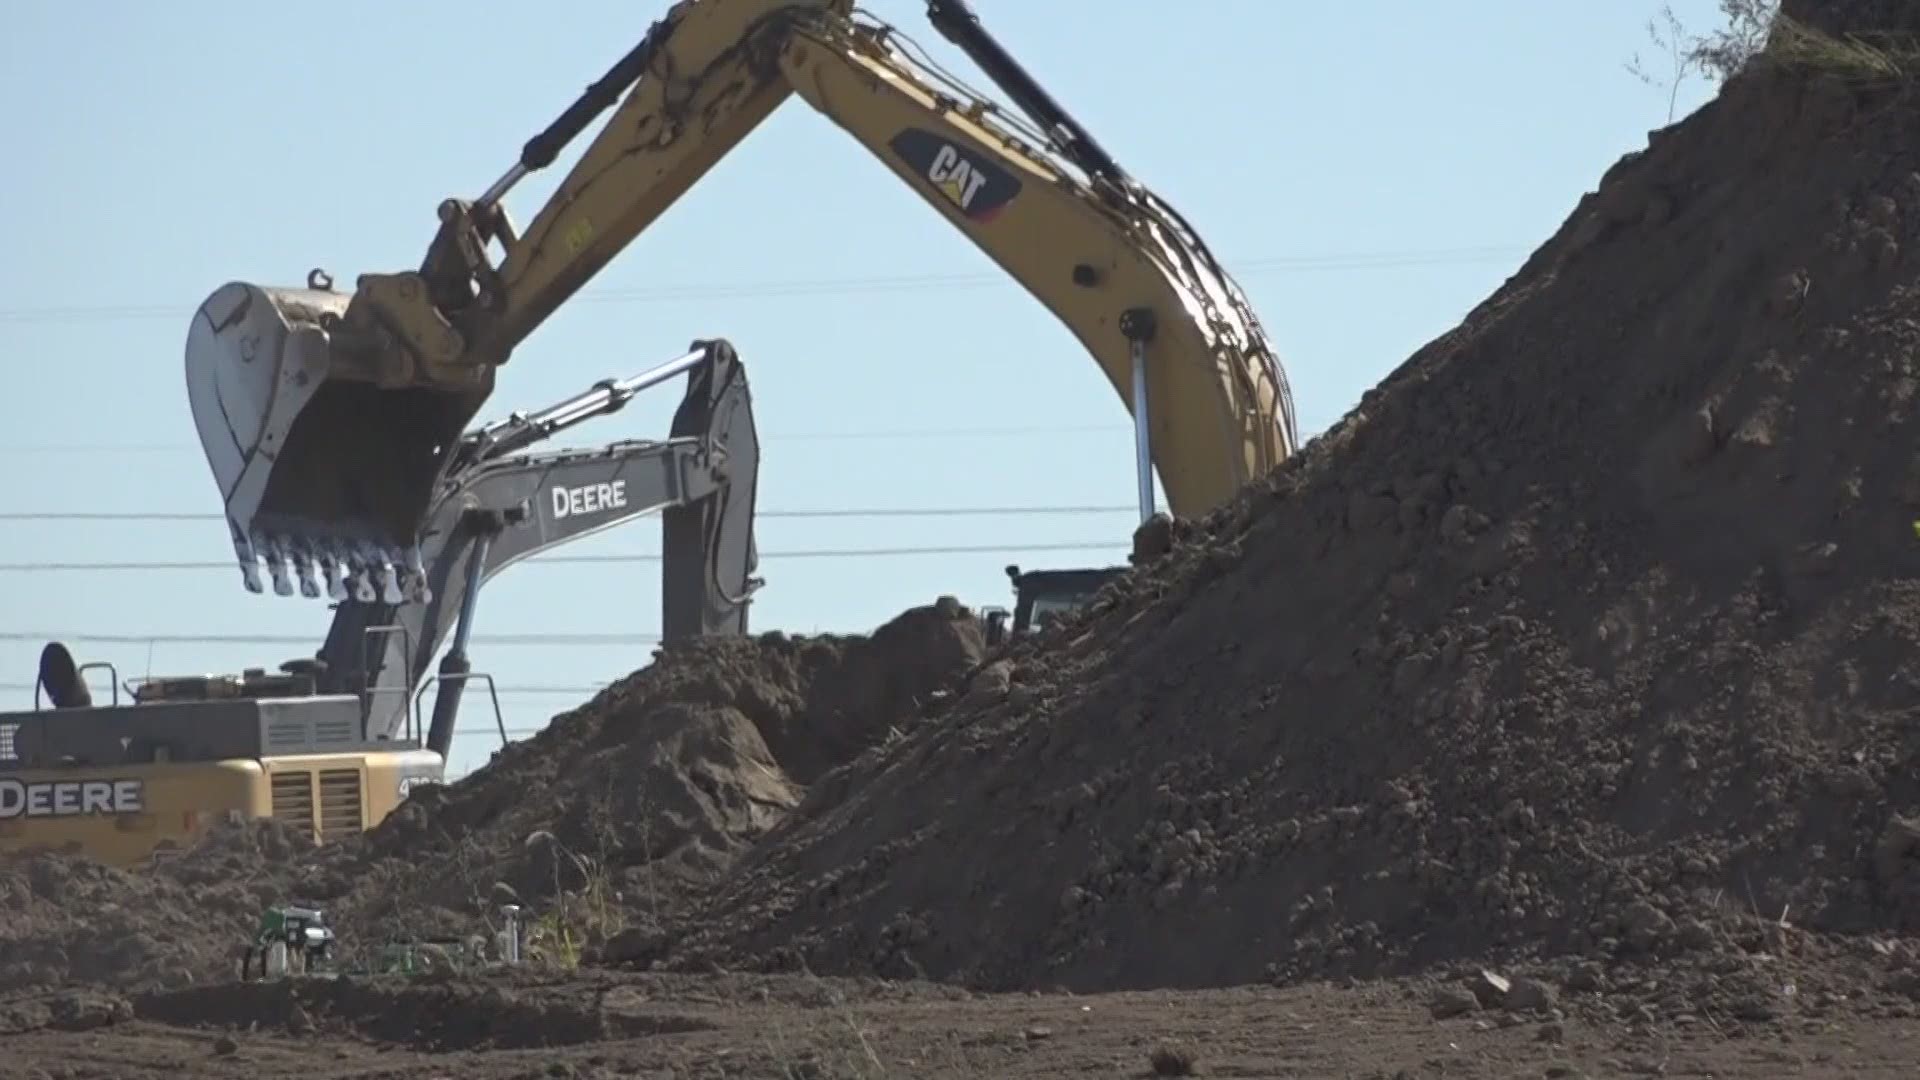 The 113,000 square foot facility could break ground before the year ends.